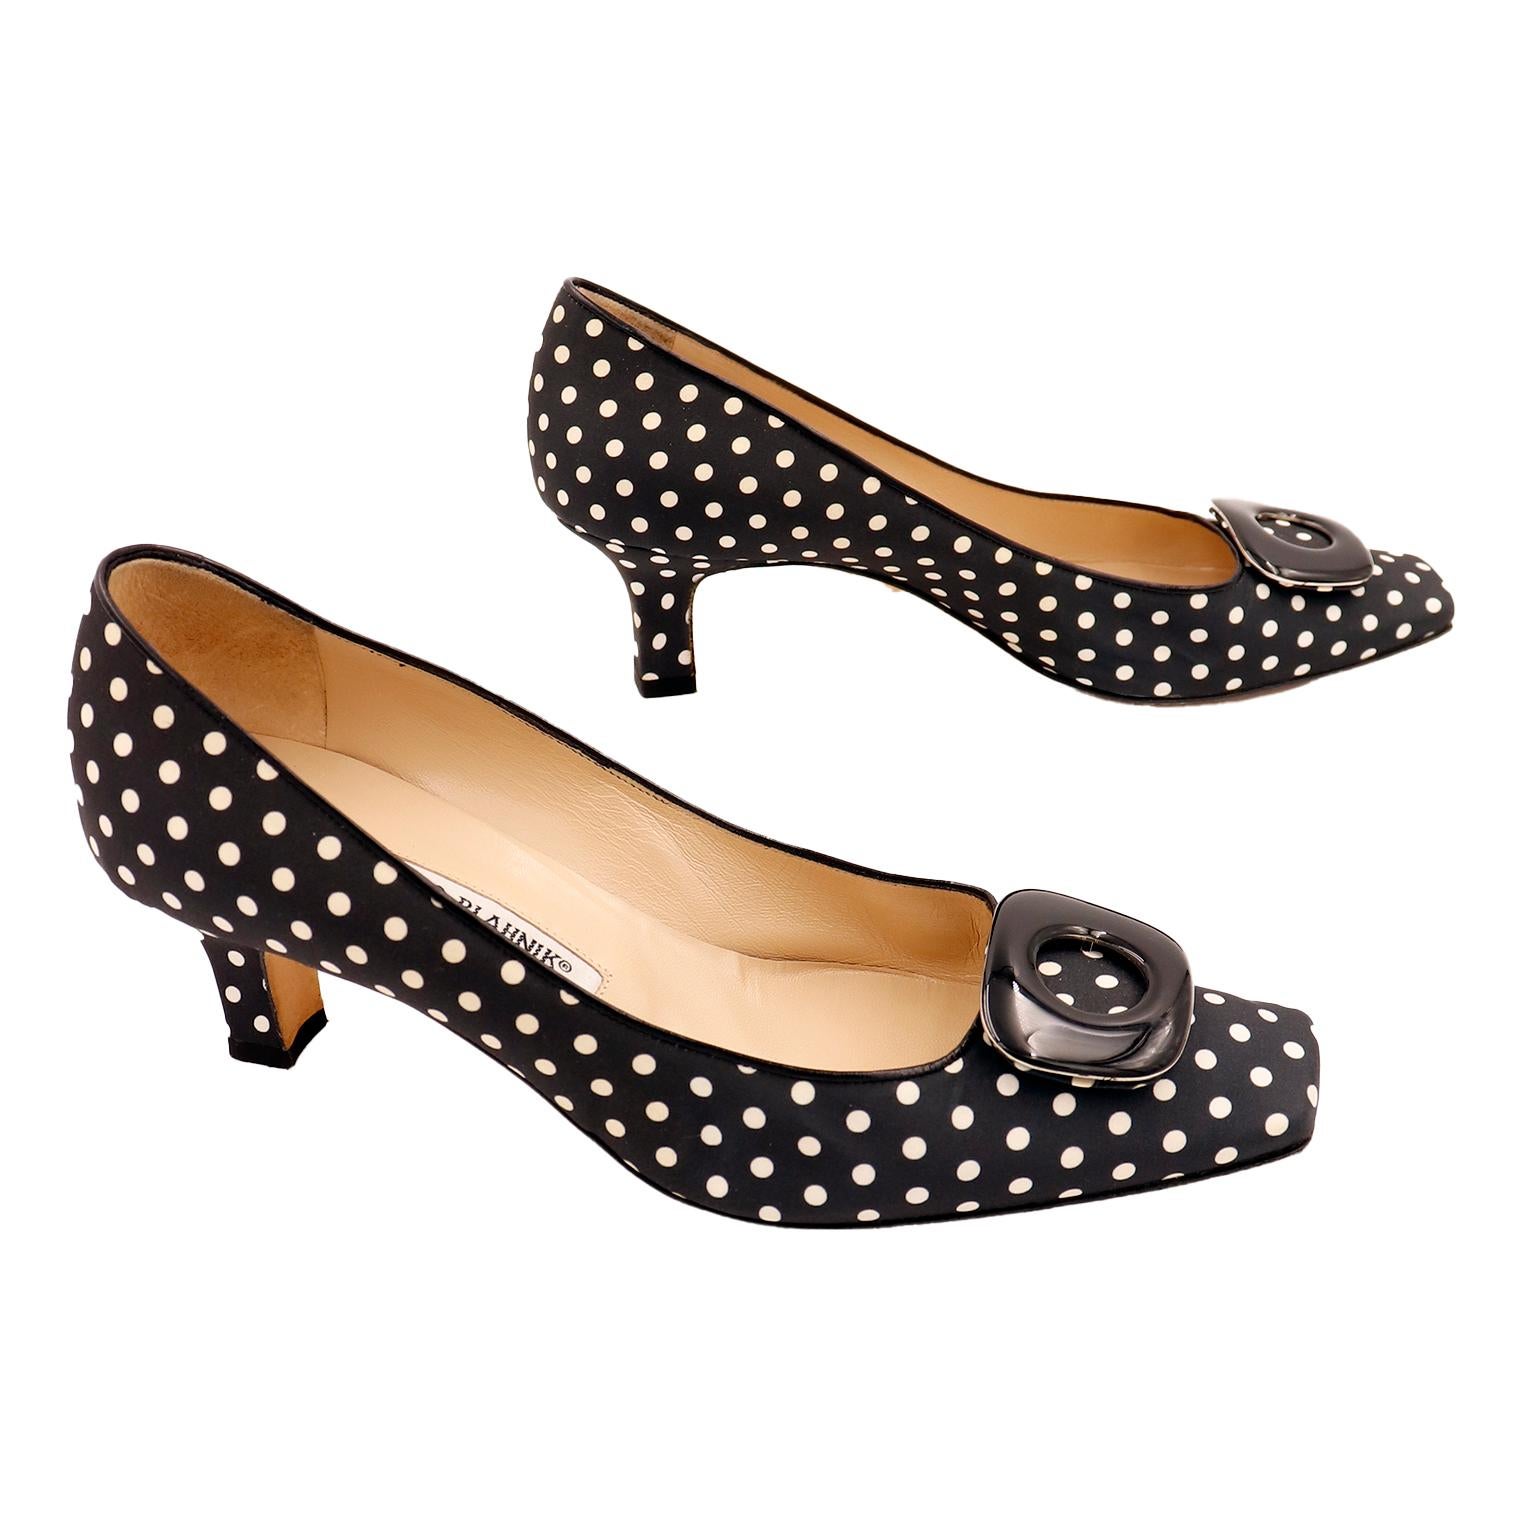 Vintage Manolo Blahnik Shoes Black & White Polka Dot Pumps w Low Heels & Buckles In Good Condition For Sale In Portland, OR